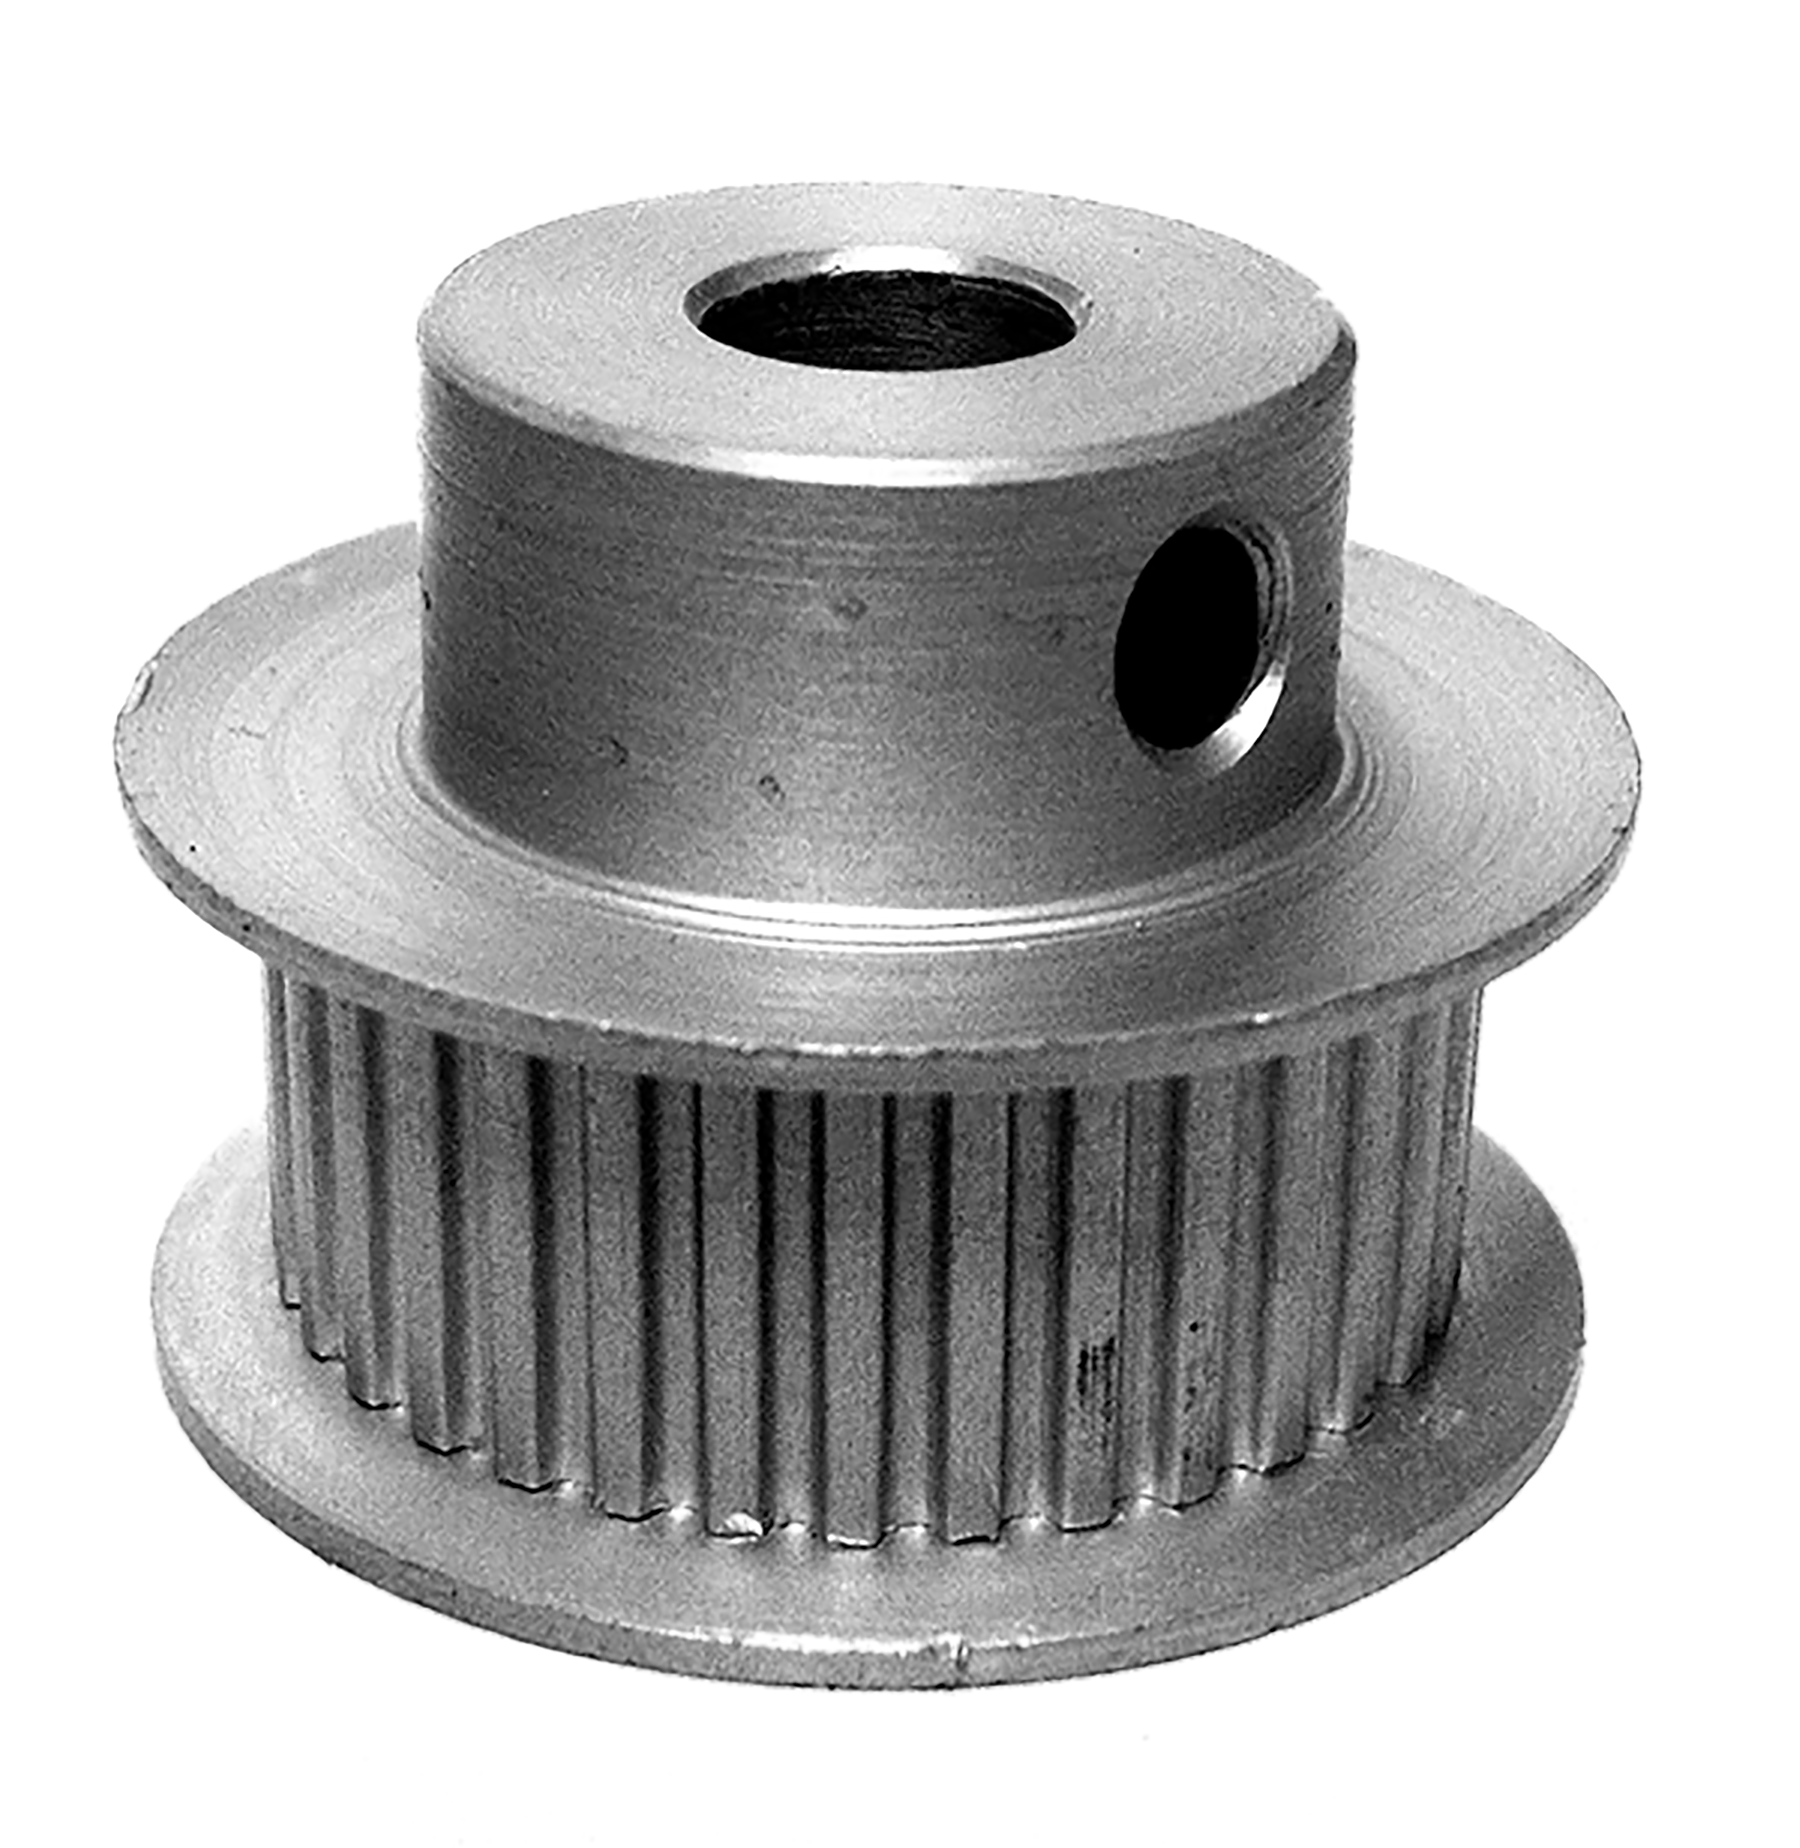 45LT312-6FA3 - Aluminum Imperial Pitch Pulleys